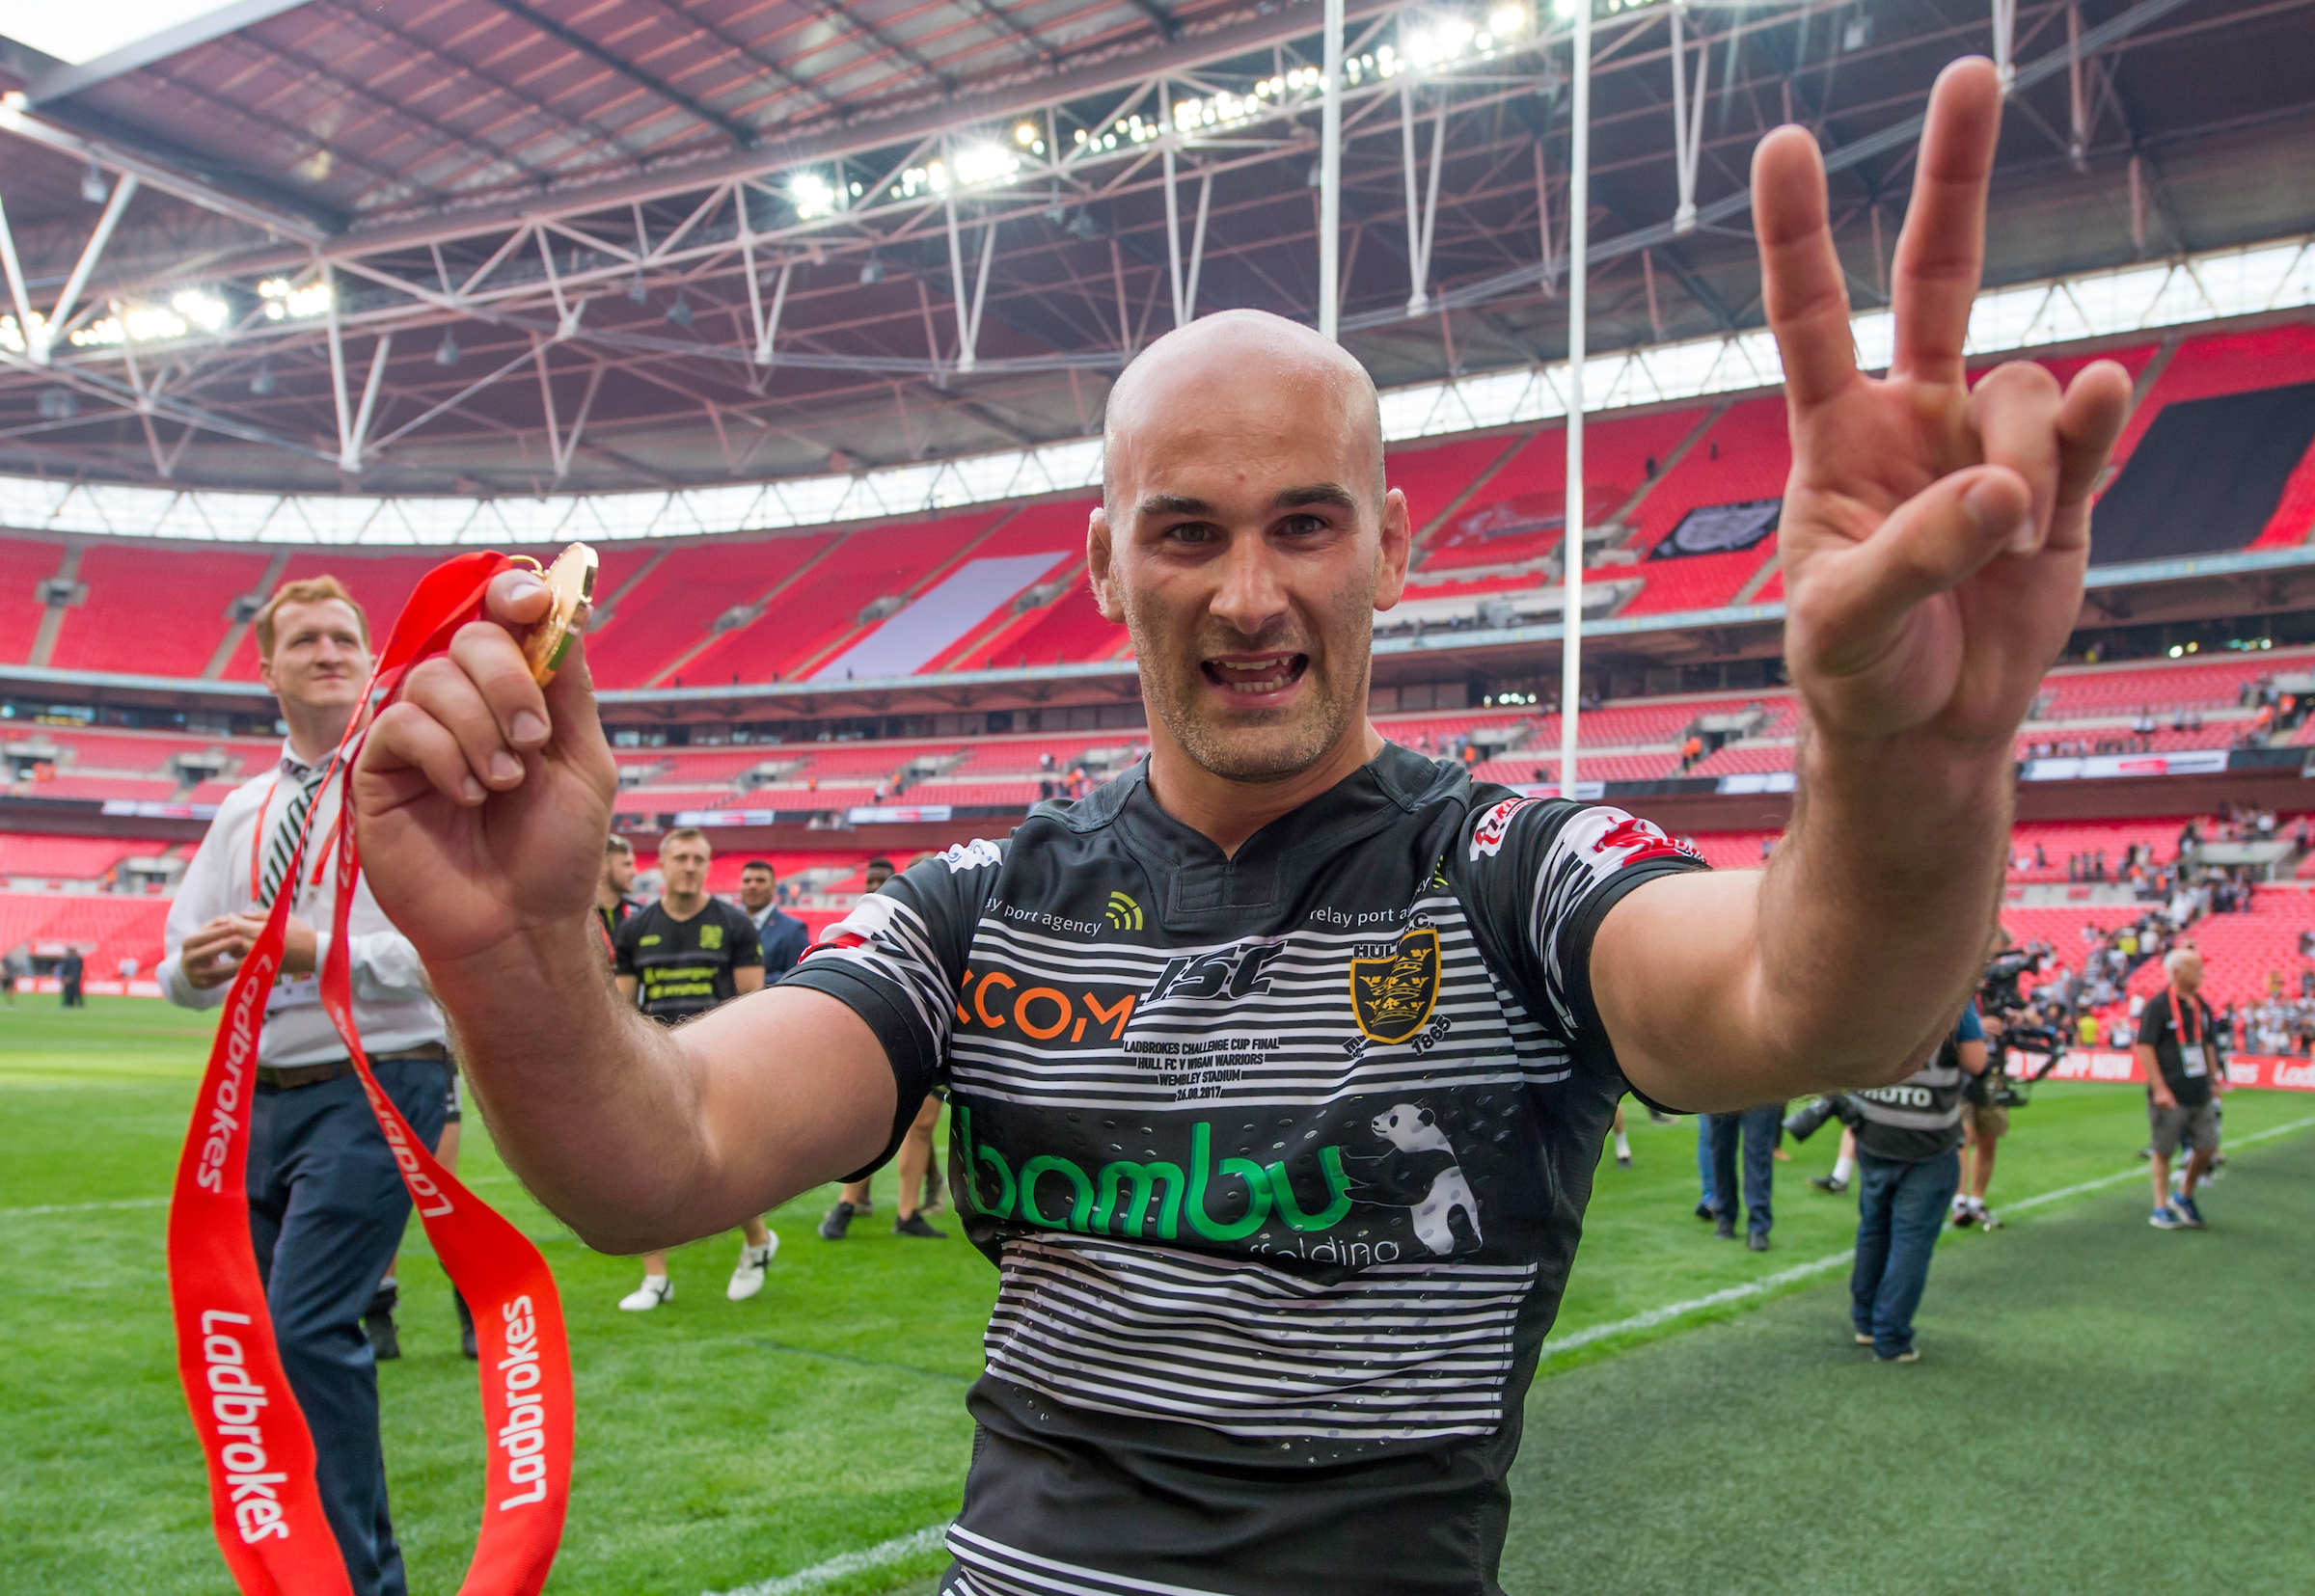 Two Wembley triumphs for Houghton